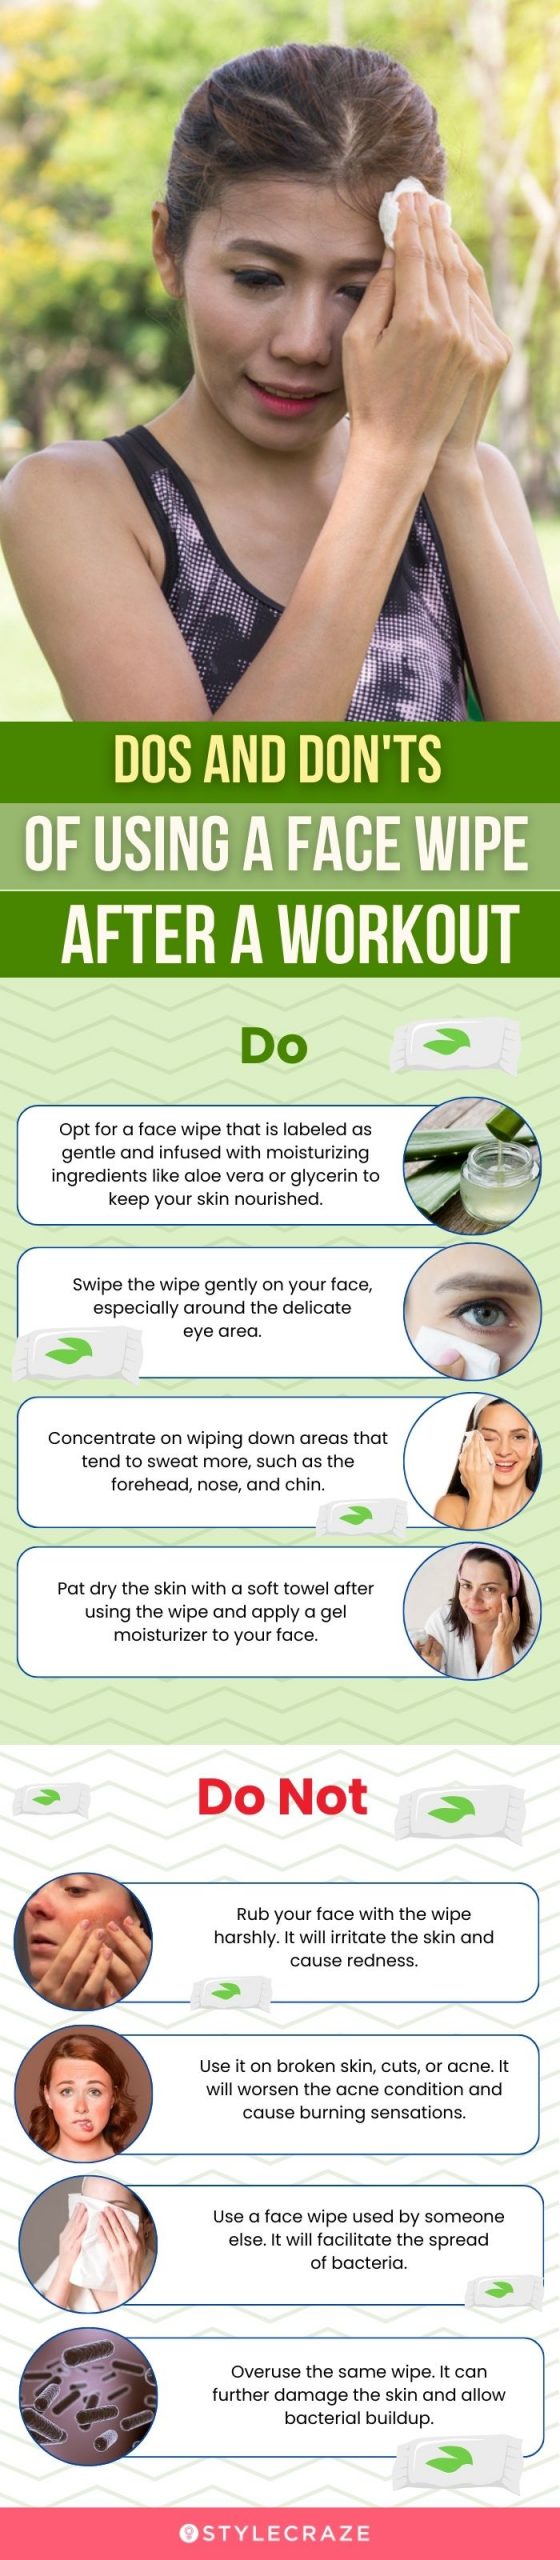 Dos And Don'ts Of Using A Face Wipe After A Workout (infographic)